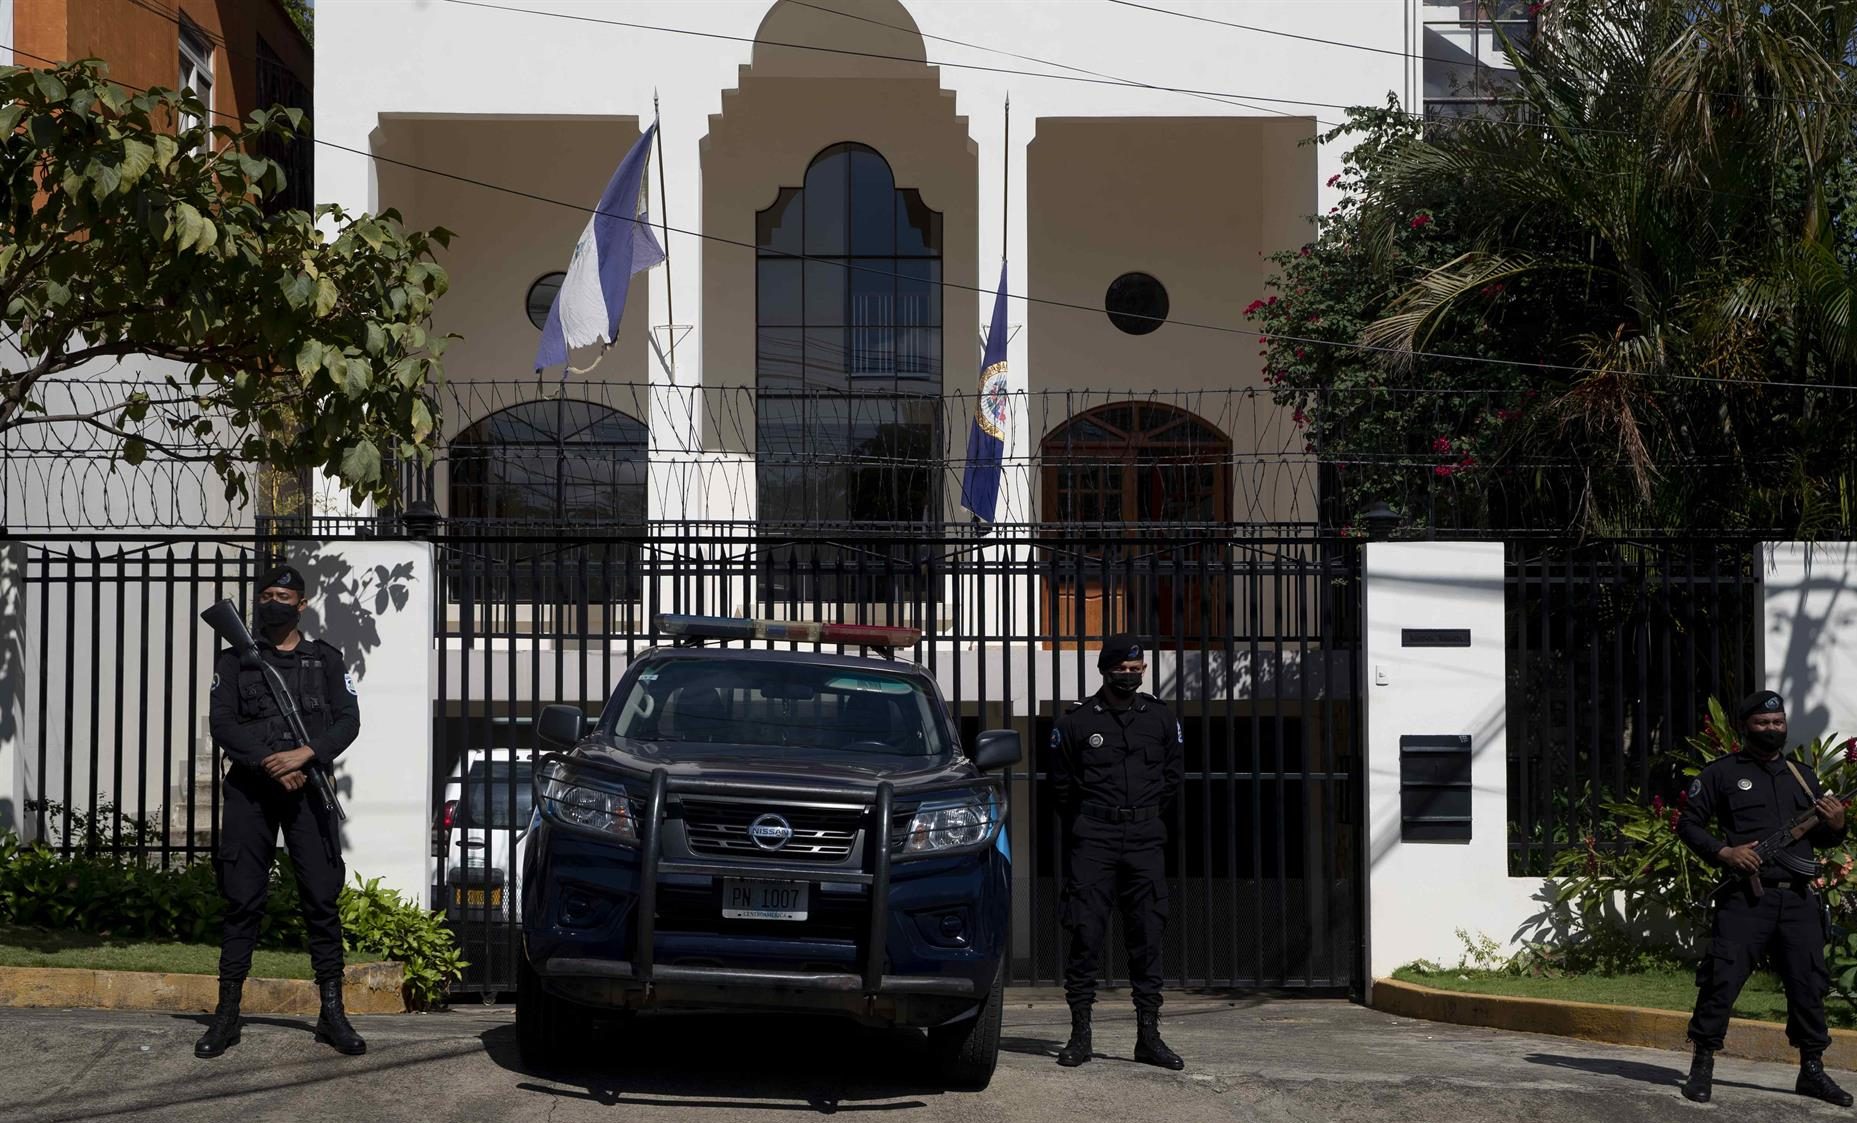 Almagro: "Unilateral closure" of the OAS office in Nicaragua is "absolutely despicable in legal terms"